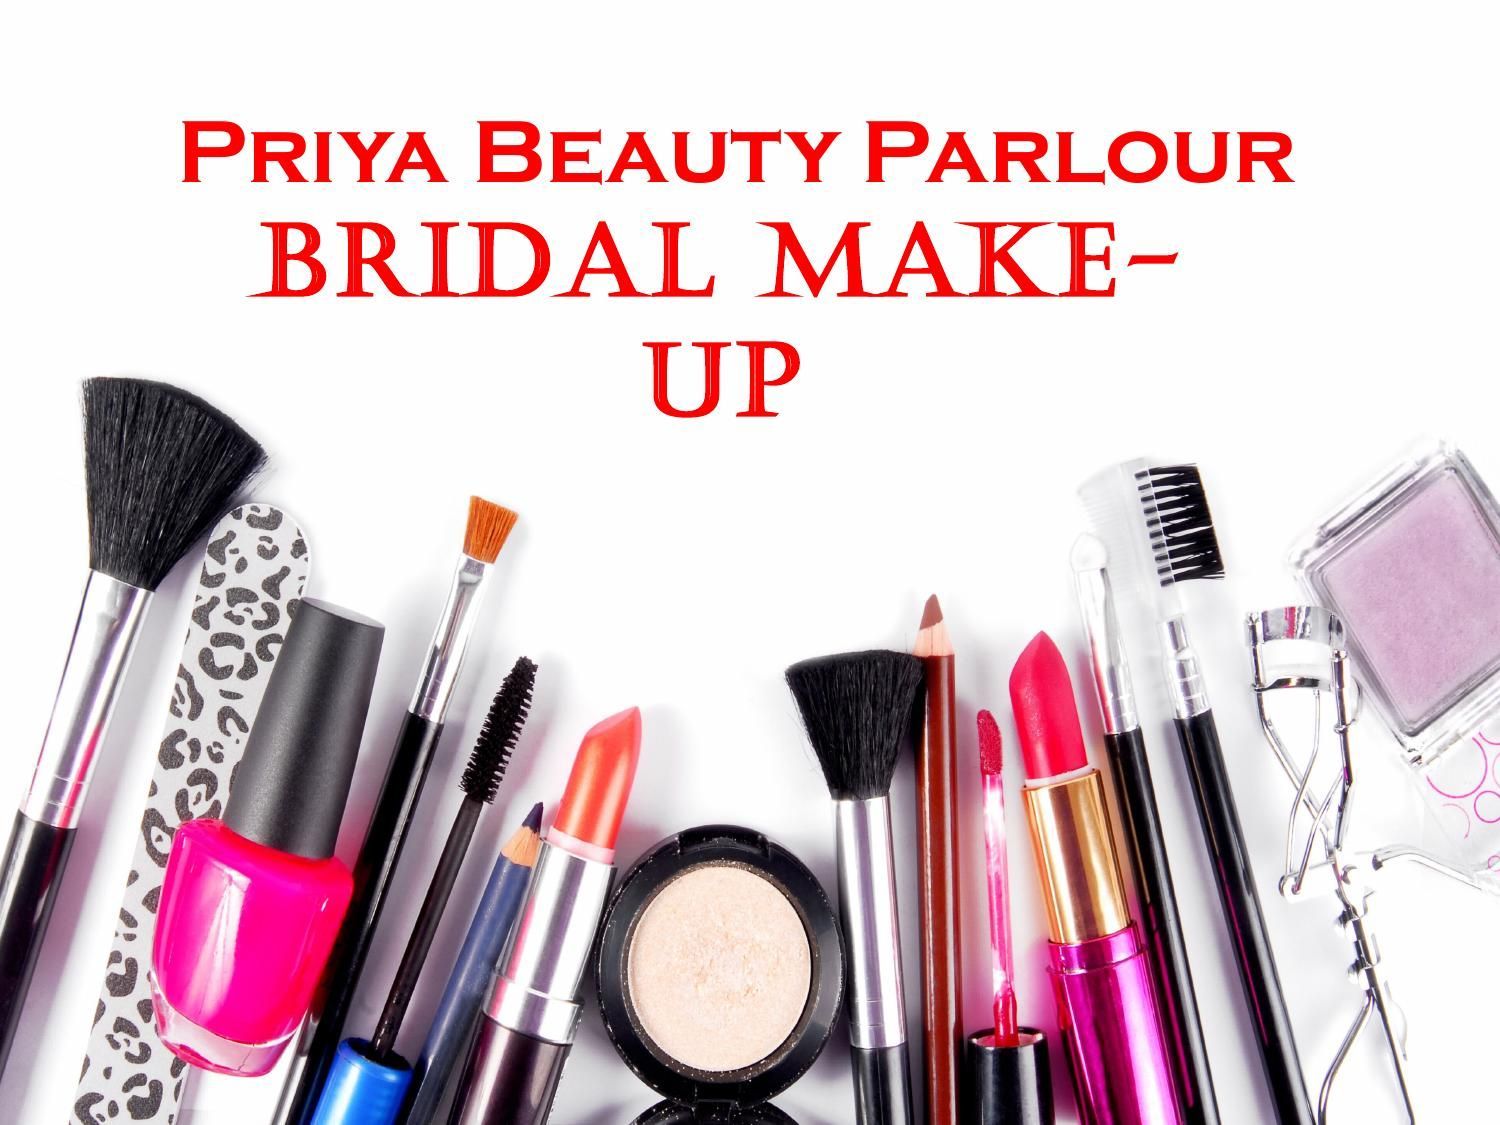 Priya Beauty Parlour Make Up. Cosmetic sets, Best makeup products, Makeup yourself